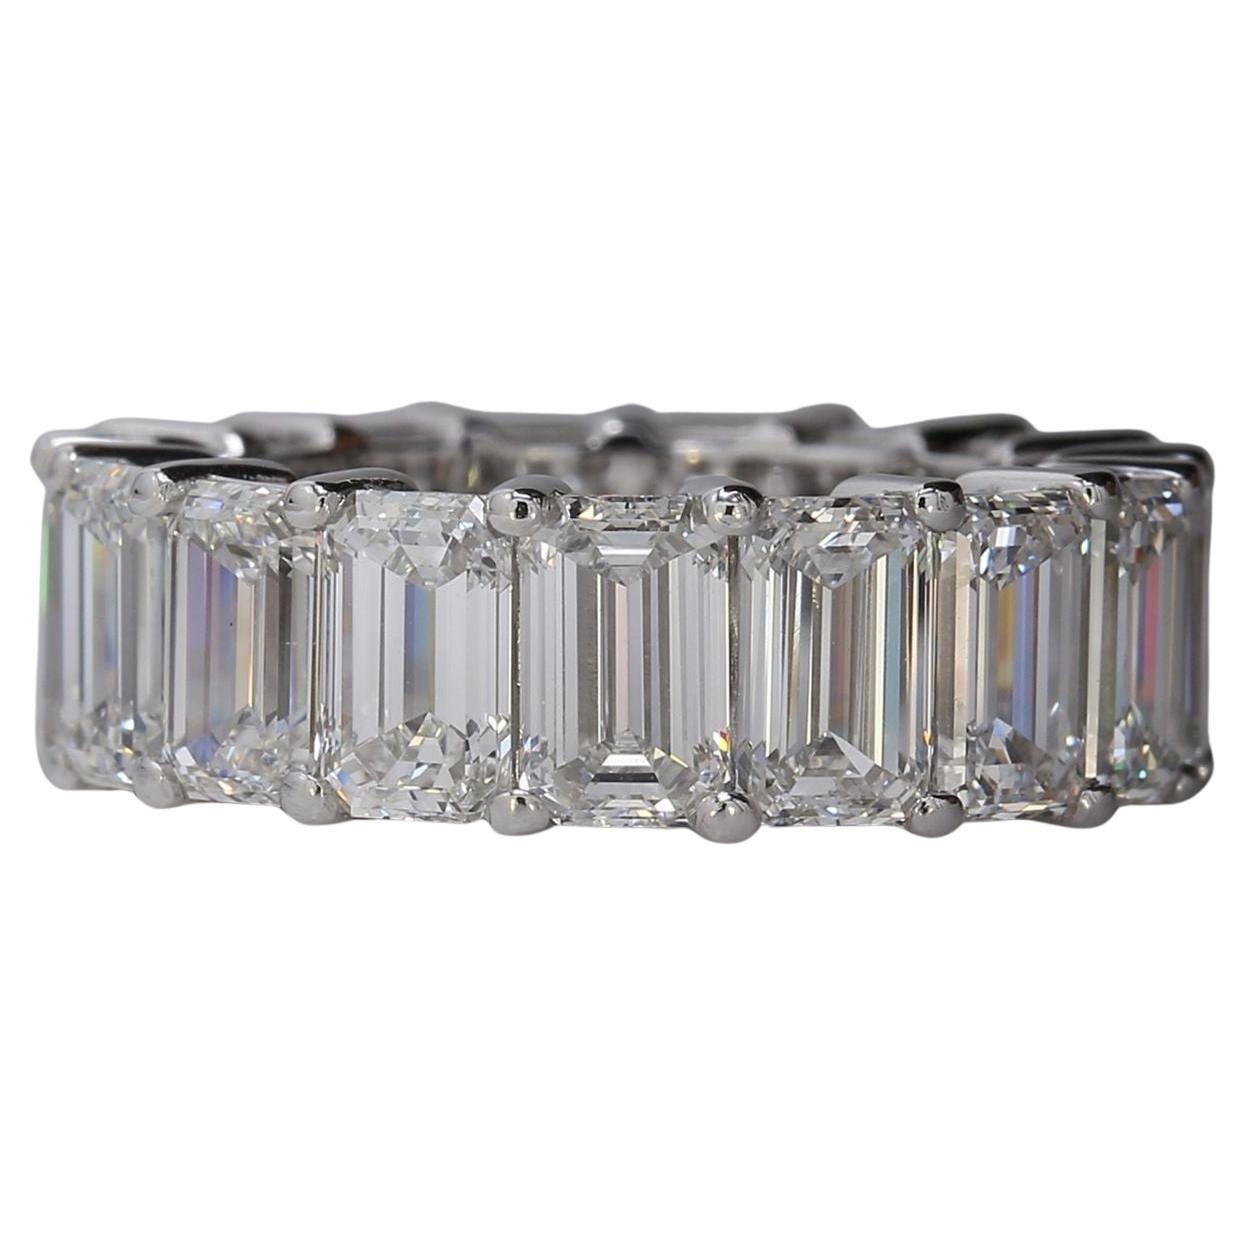  timeless elegance with our breathtaking Eternity Band in platinum, adorned with 17 exquisite emerald-cut diamonds totaling a remarkable 12.11 carats.

Crafted to perfection, each emerald-cut diamond is meticulously selected and GIA certified to